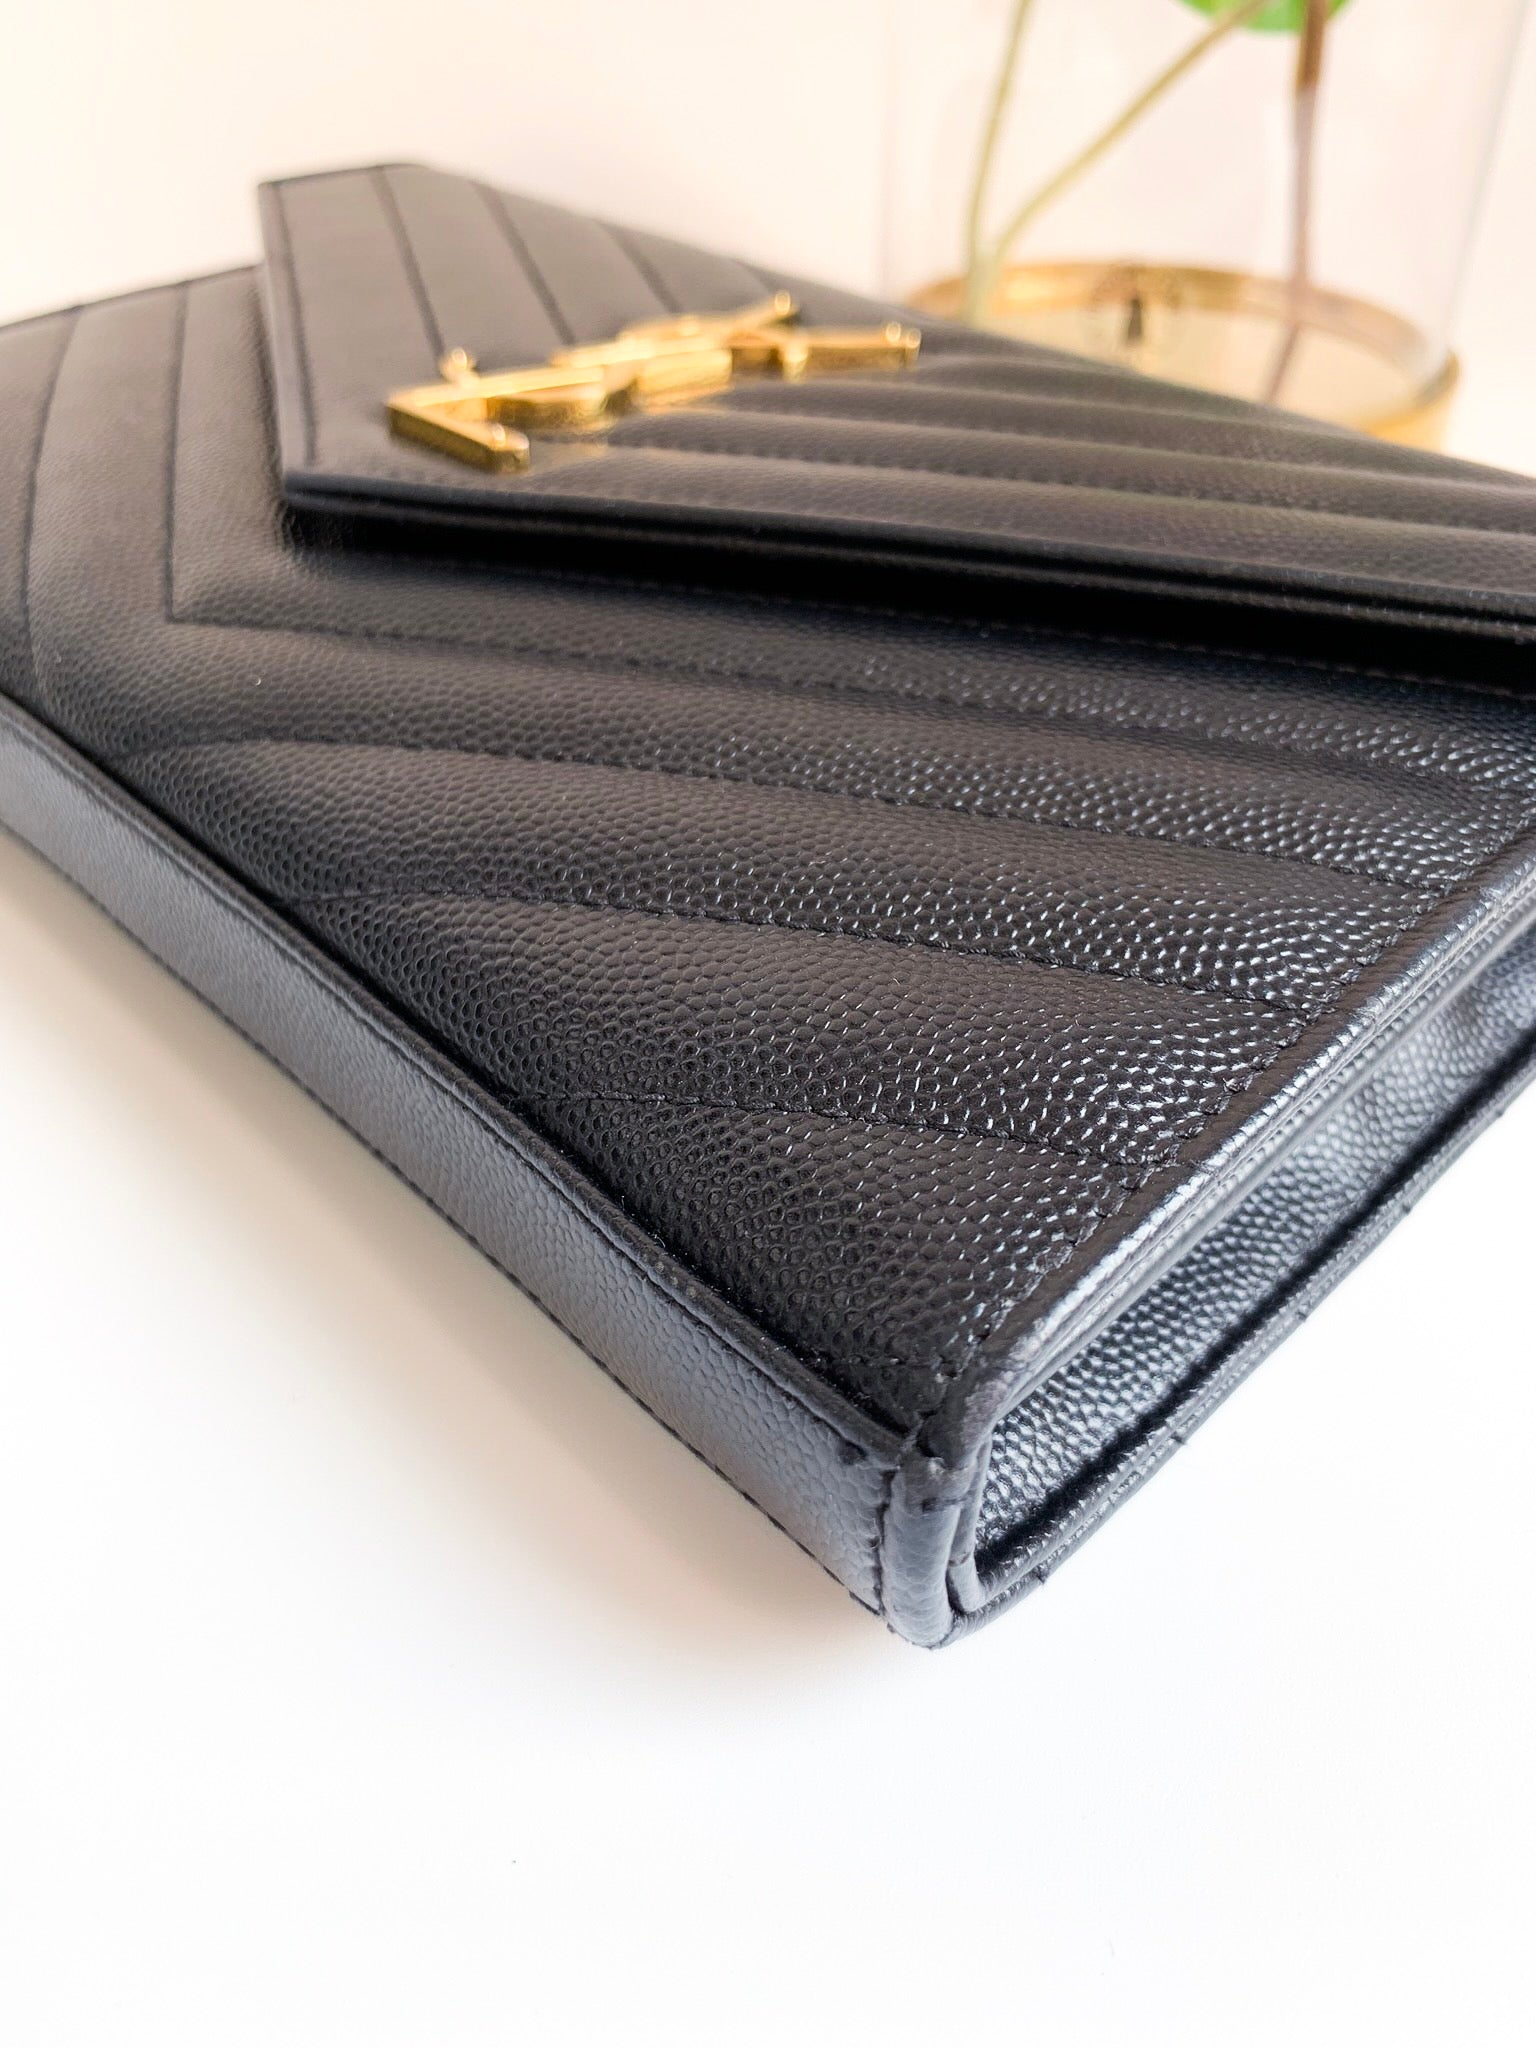 Saint Laurent Wallet on Chain Large, Black Pebbled Leather with Black  Hardware, Preowned in Box WA001